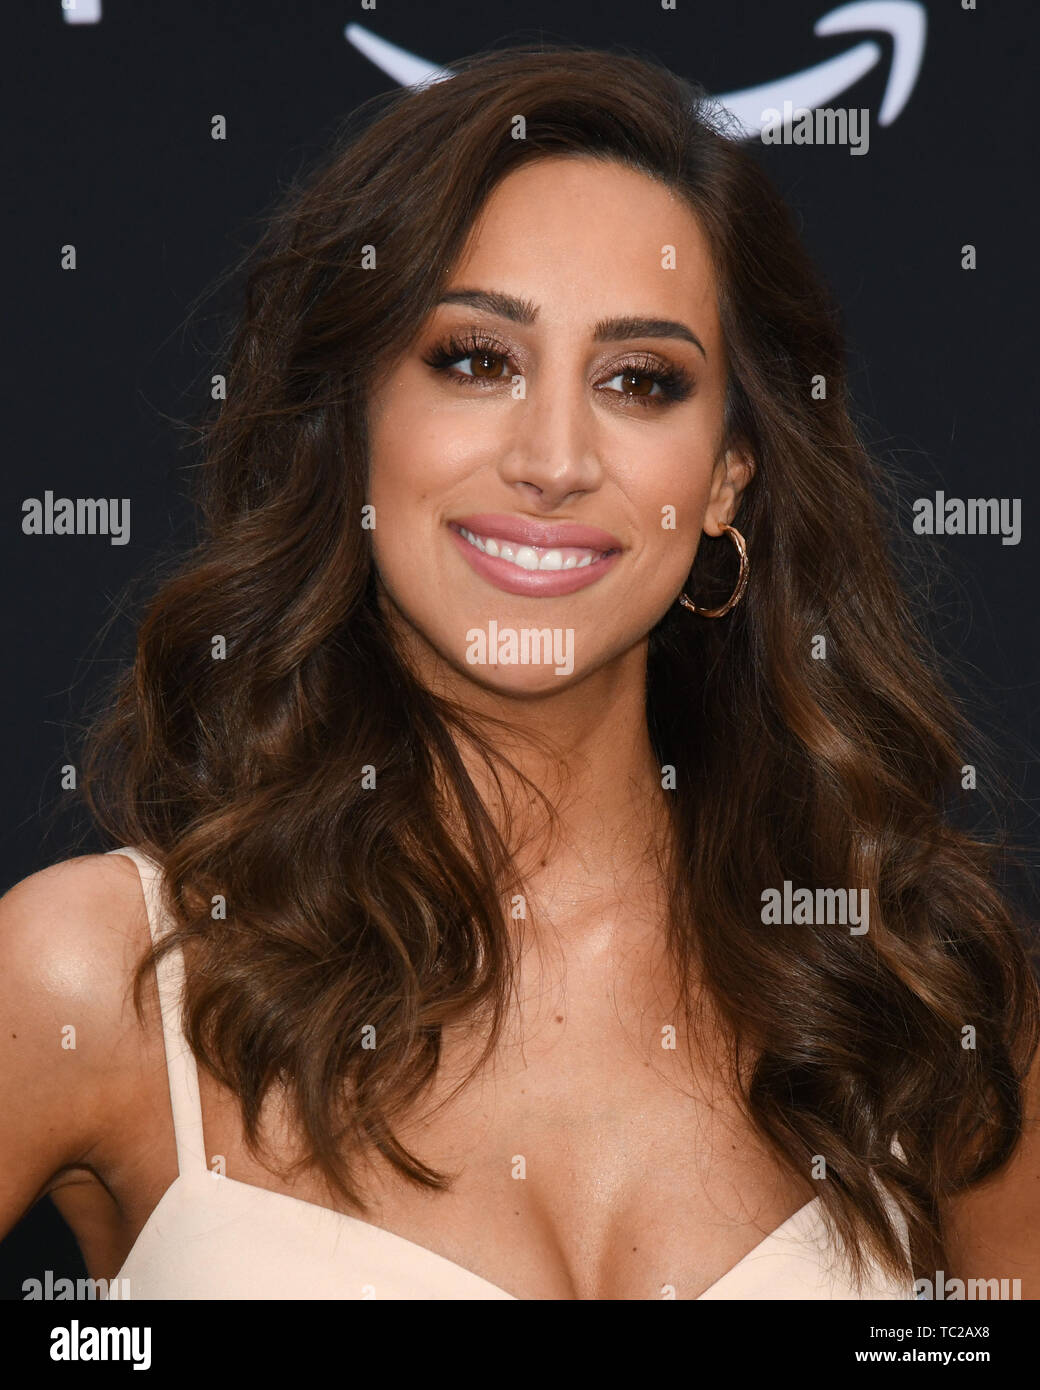 June 3, 2019 - Westwood, California, USA - 02, June 2019 - Westwood Village, California. Danielle Jonas attends Premiere Of Amazon Prime Video's 'Chasing Happiness' at the Regency Village Bruin Theatre. (Credit Image: © Billy Bennight/ZUMA Wire) Stock Photo